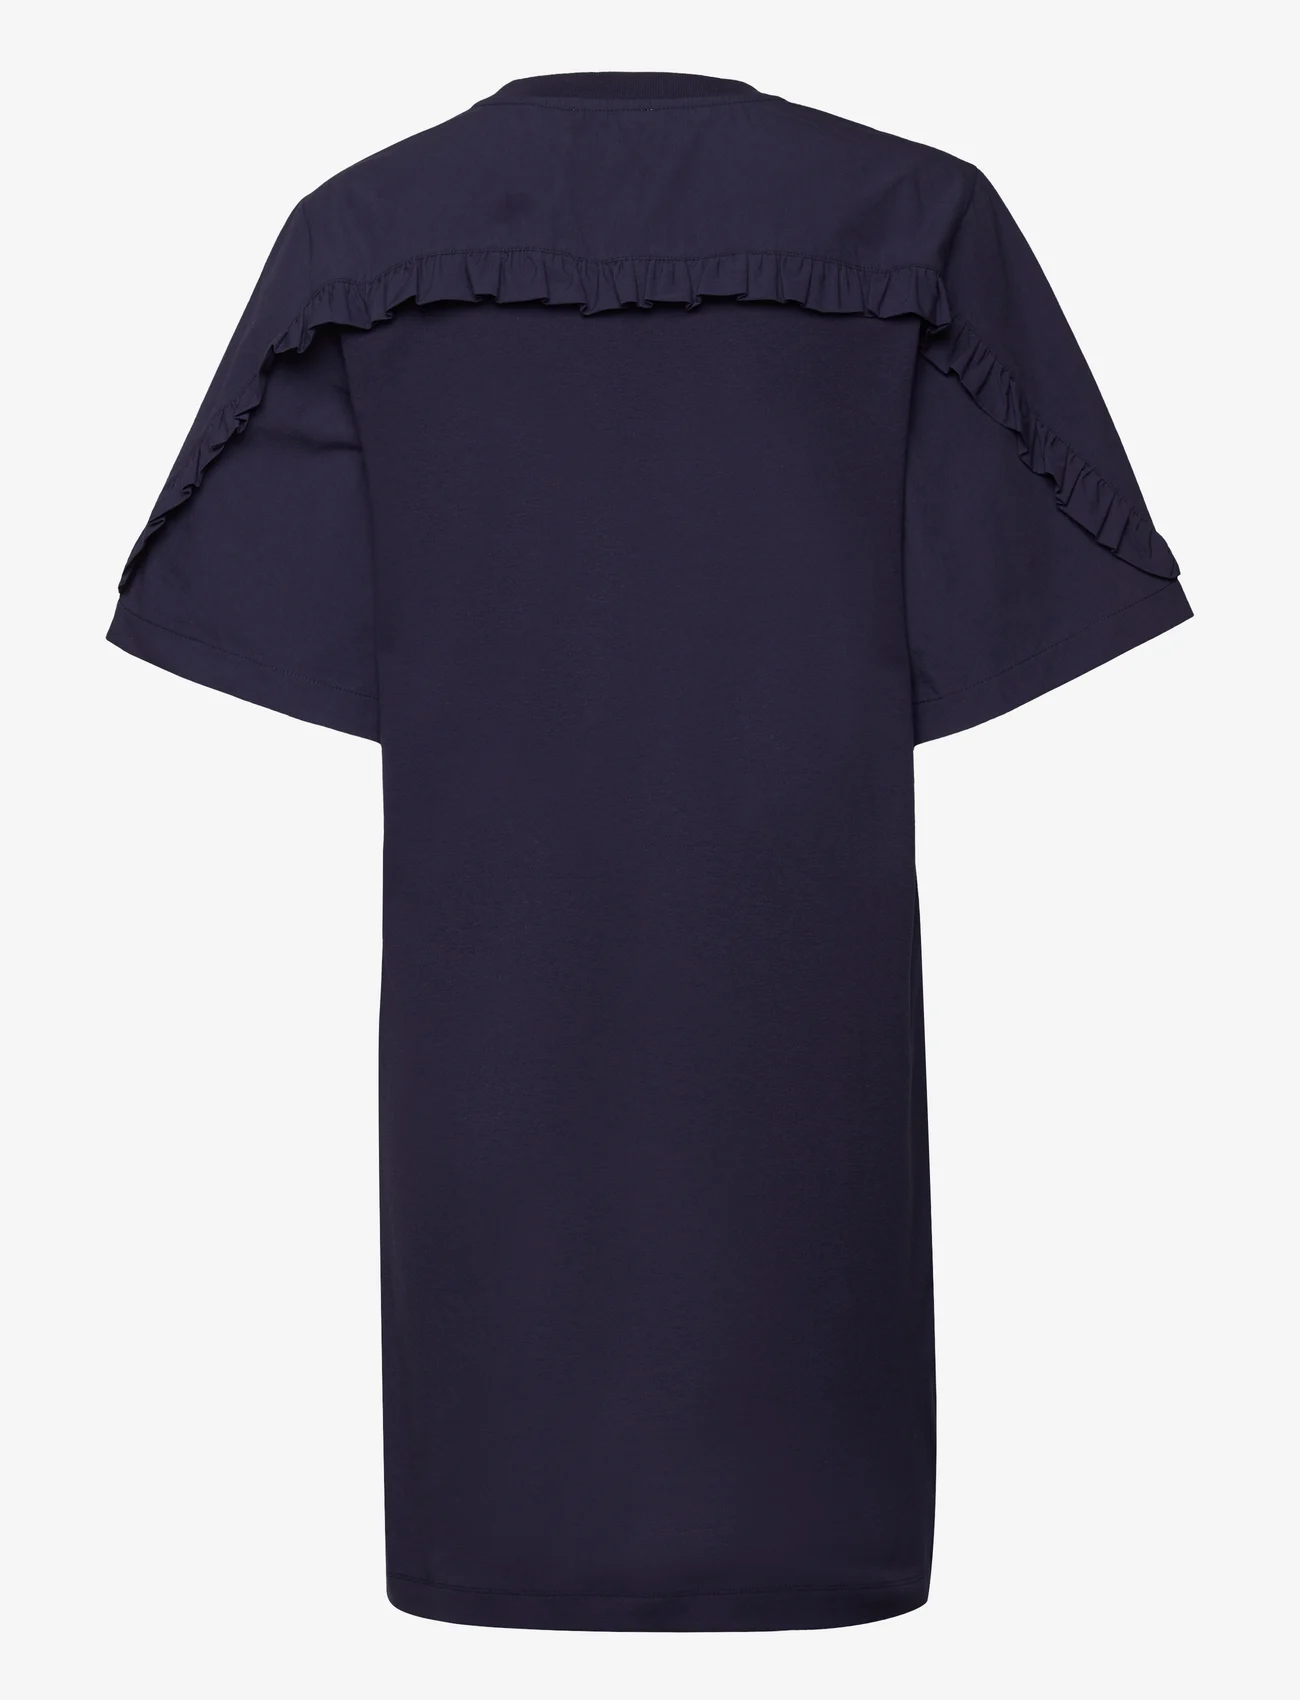 See by Chloé - Dress - t-paitamekot - evening blue - 1